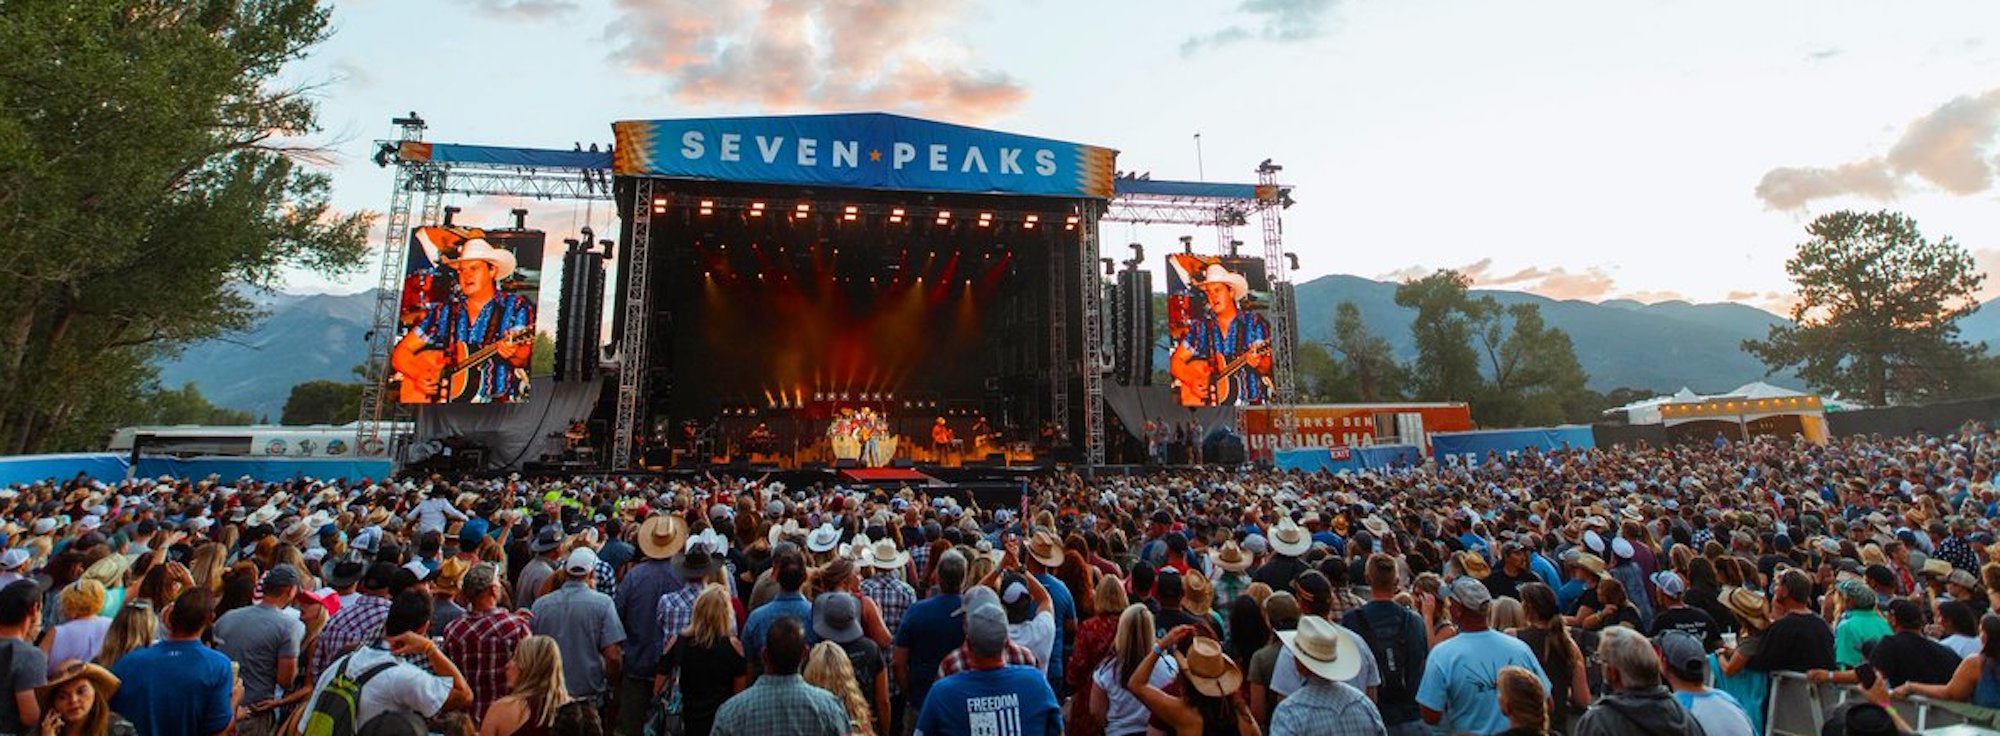 Dierks Bentley’s Seven Peaks Music Fest Canceled Due to COVID Capacity Cap